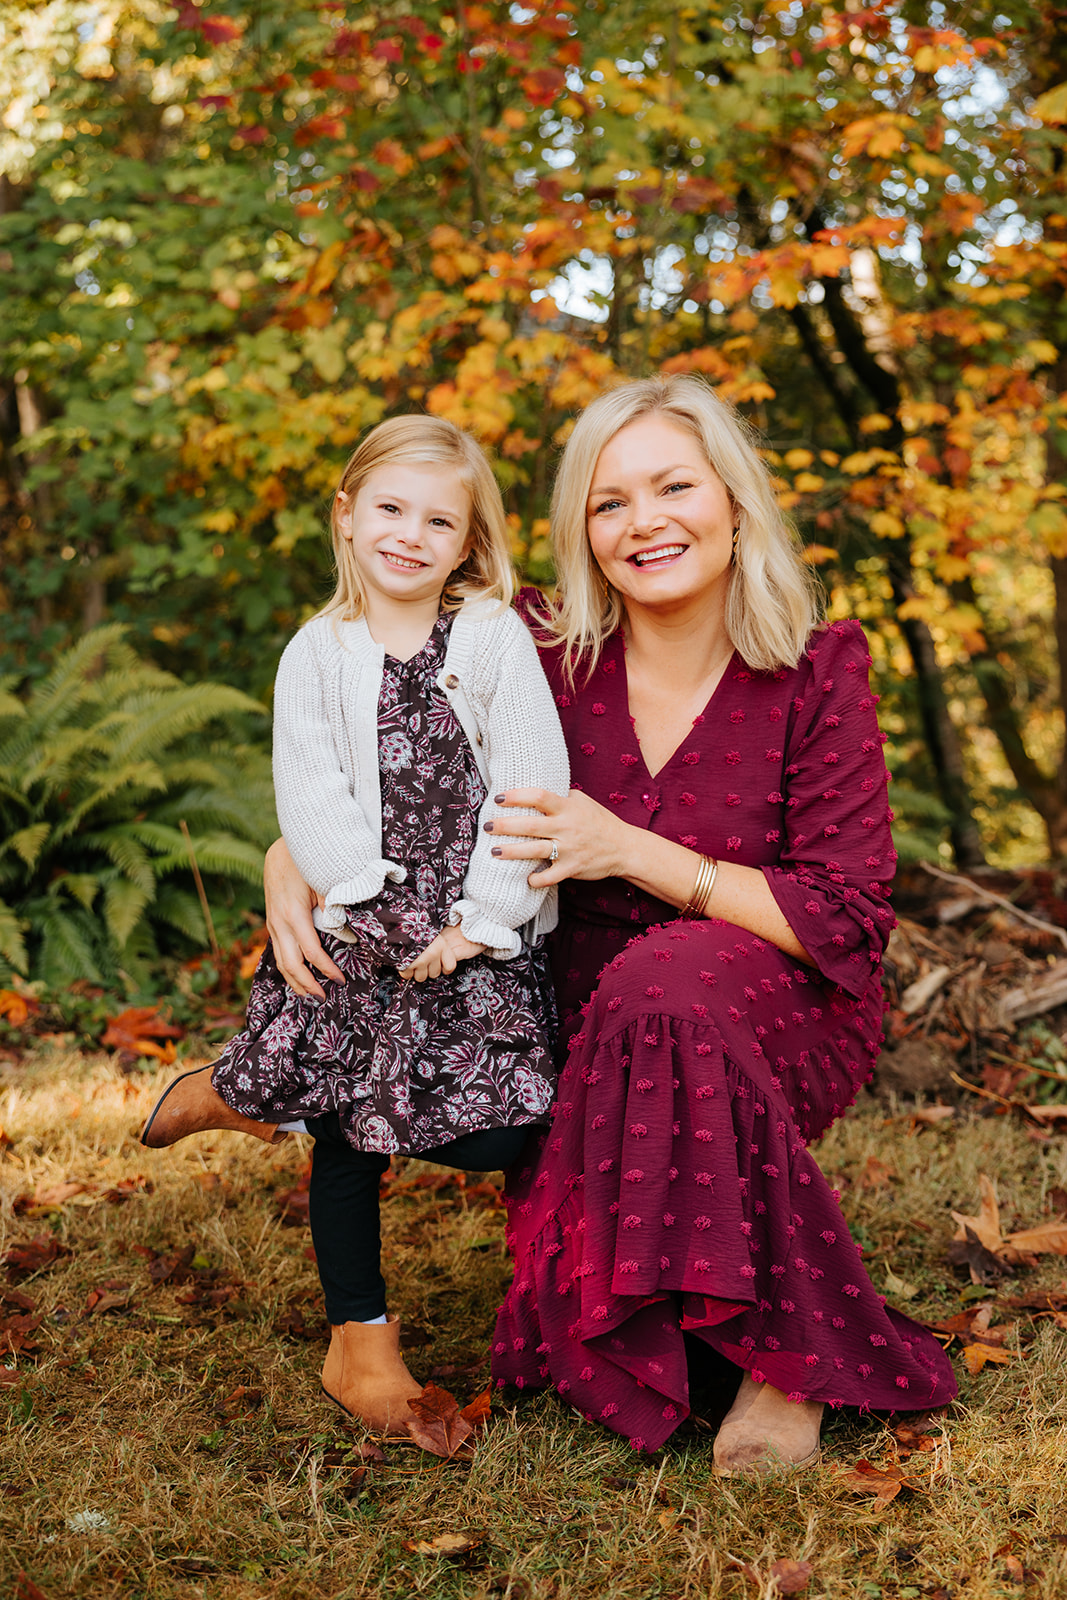 A photo of a mother and daughter smiling for the camera in front of colorful fall foliage at a Seattle park.